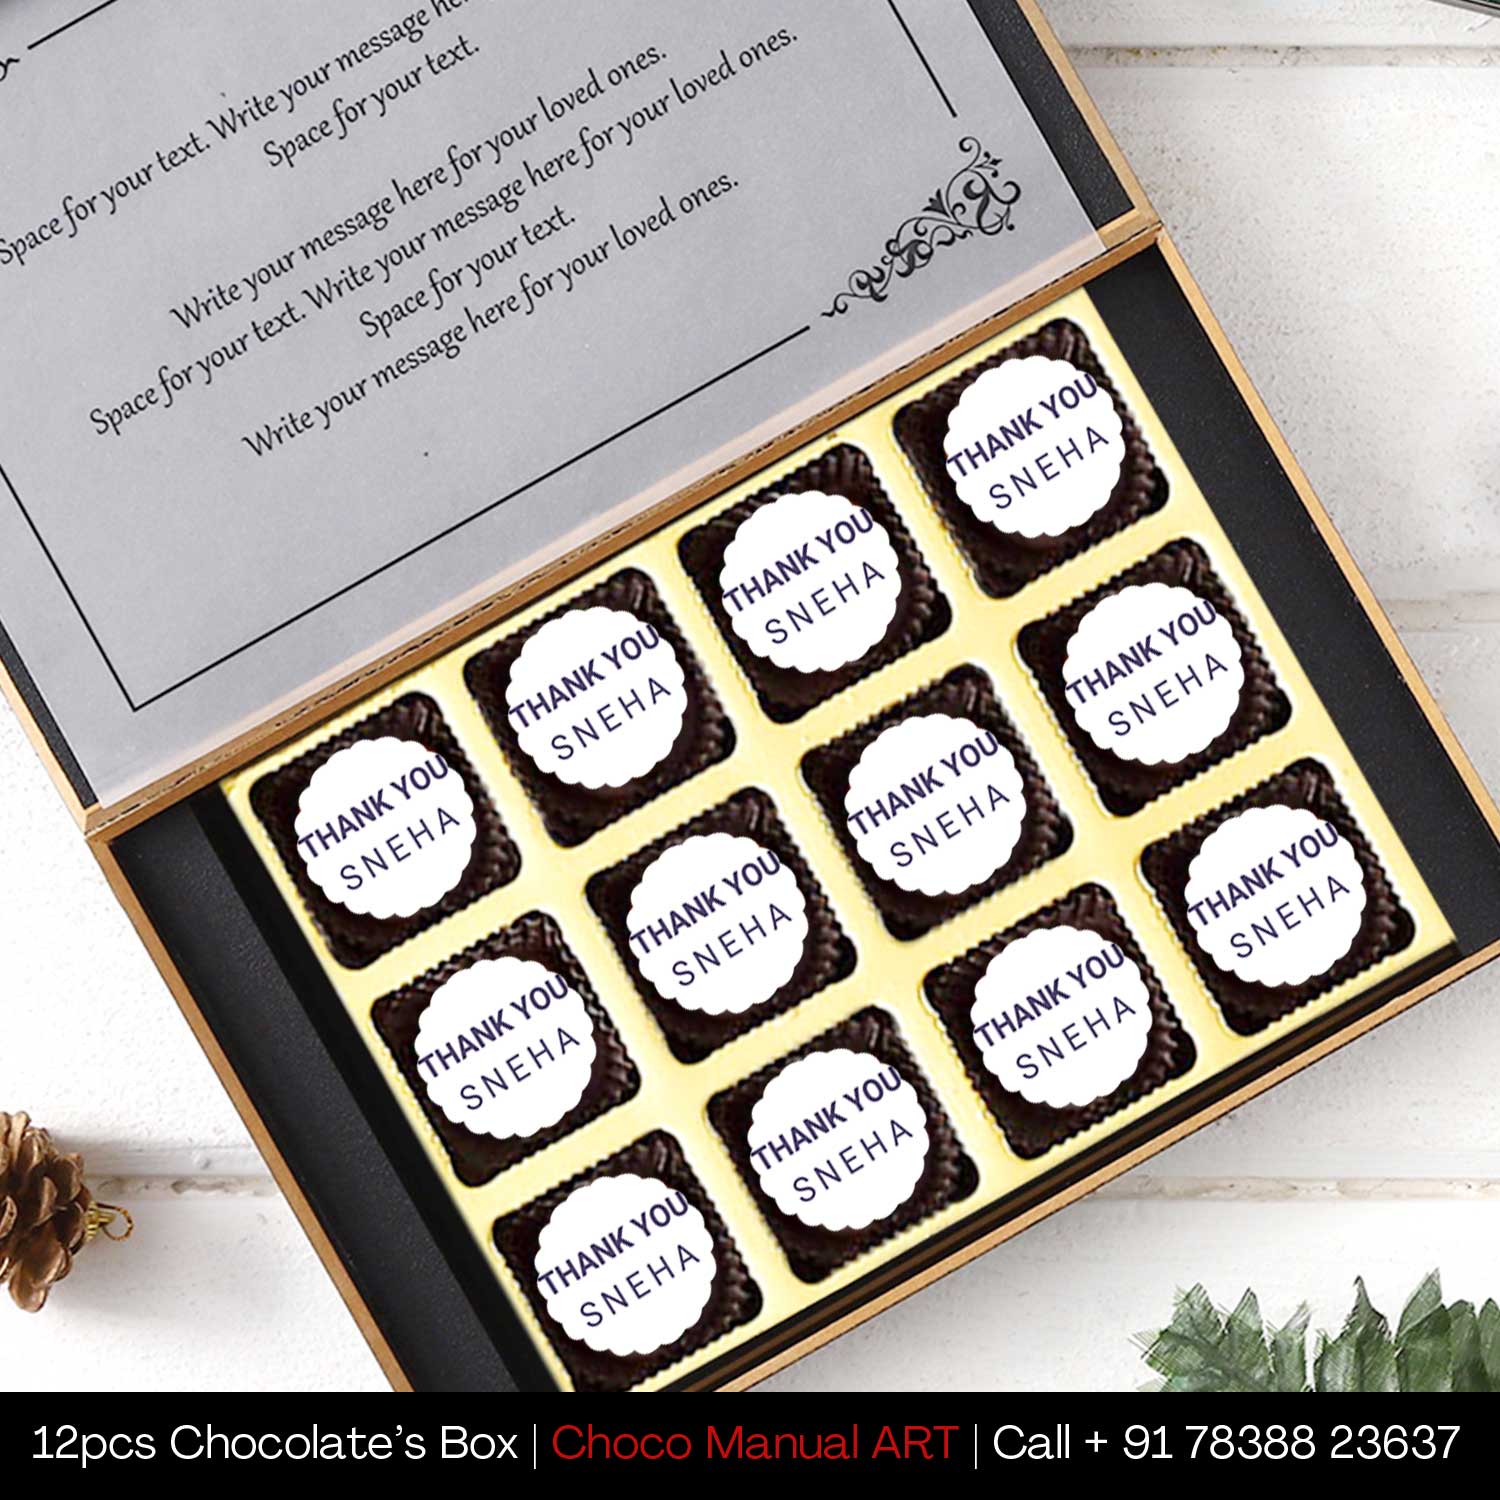 Buy Thank You Customised Chocolate Gifts Online In India